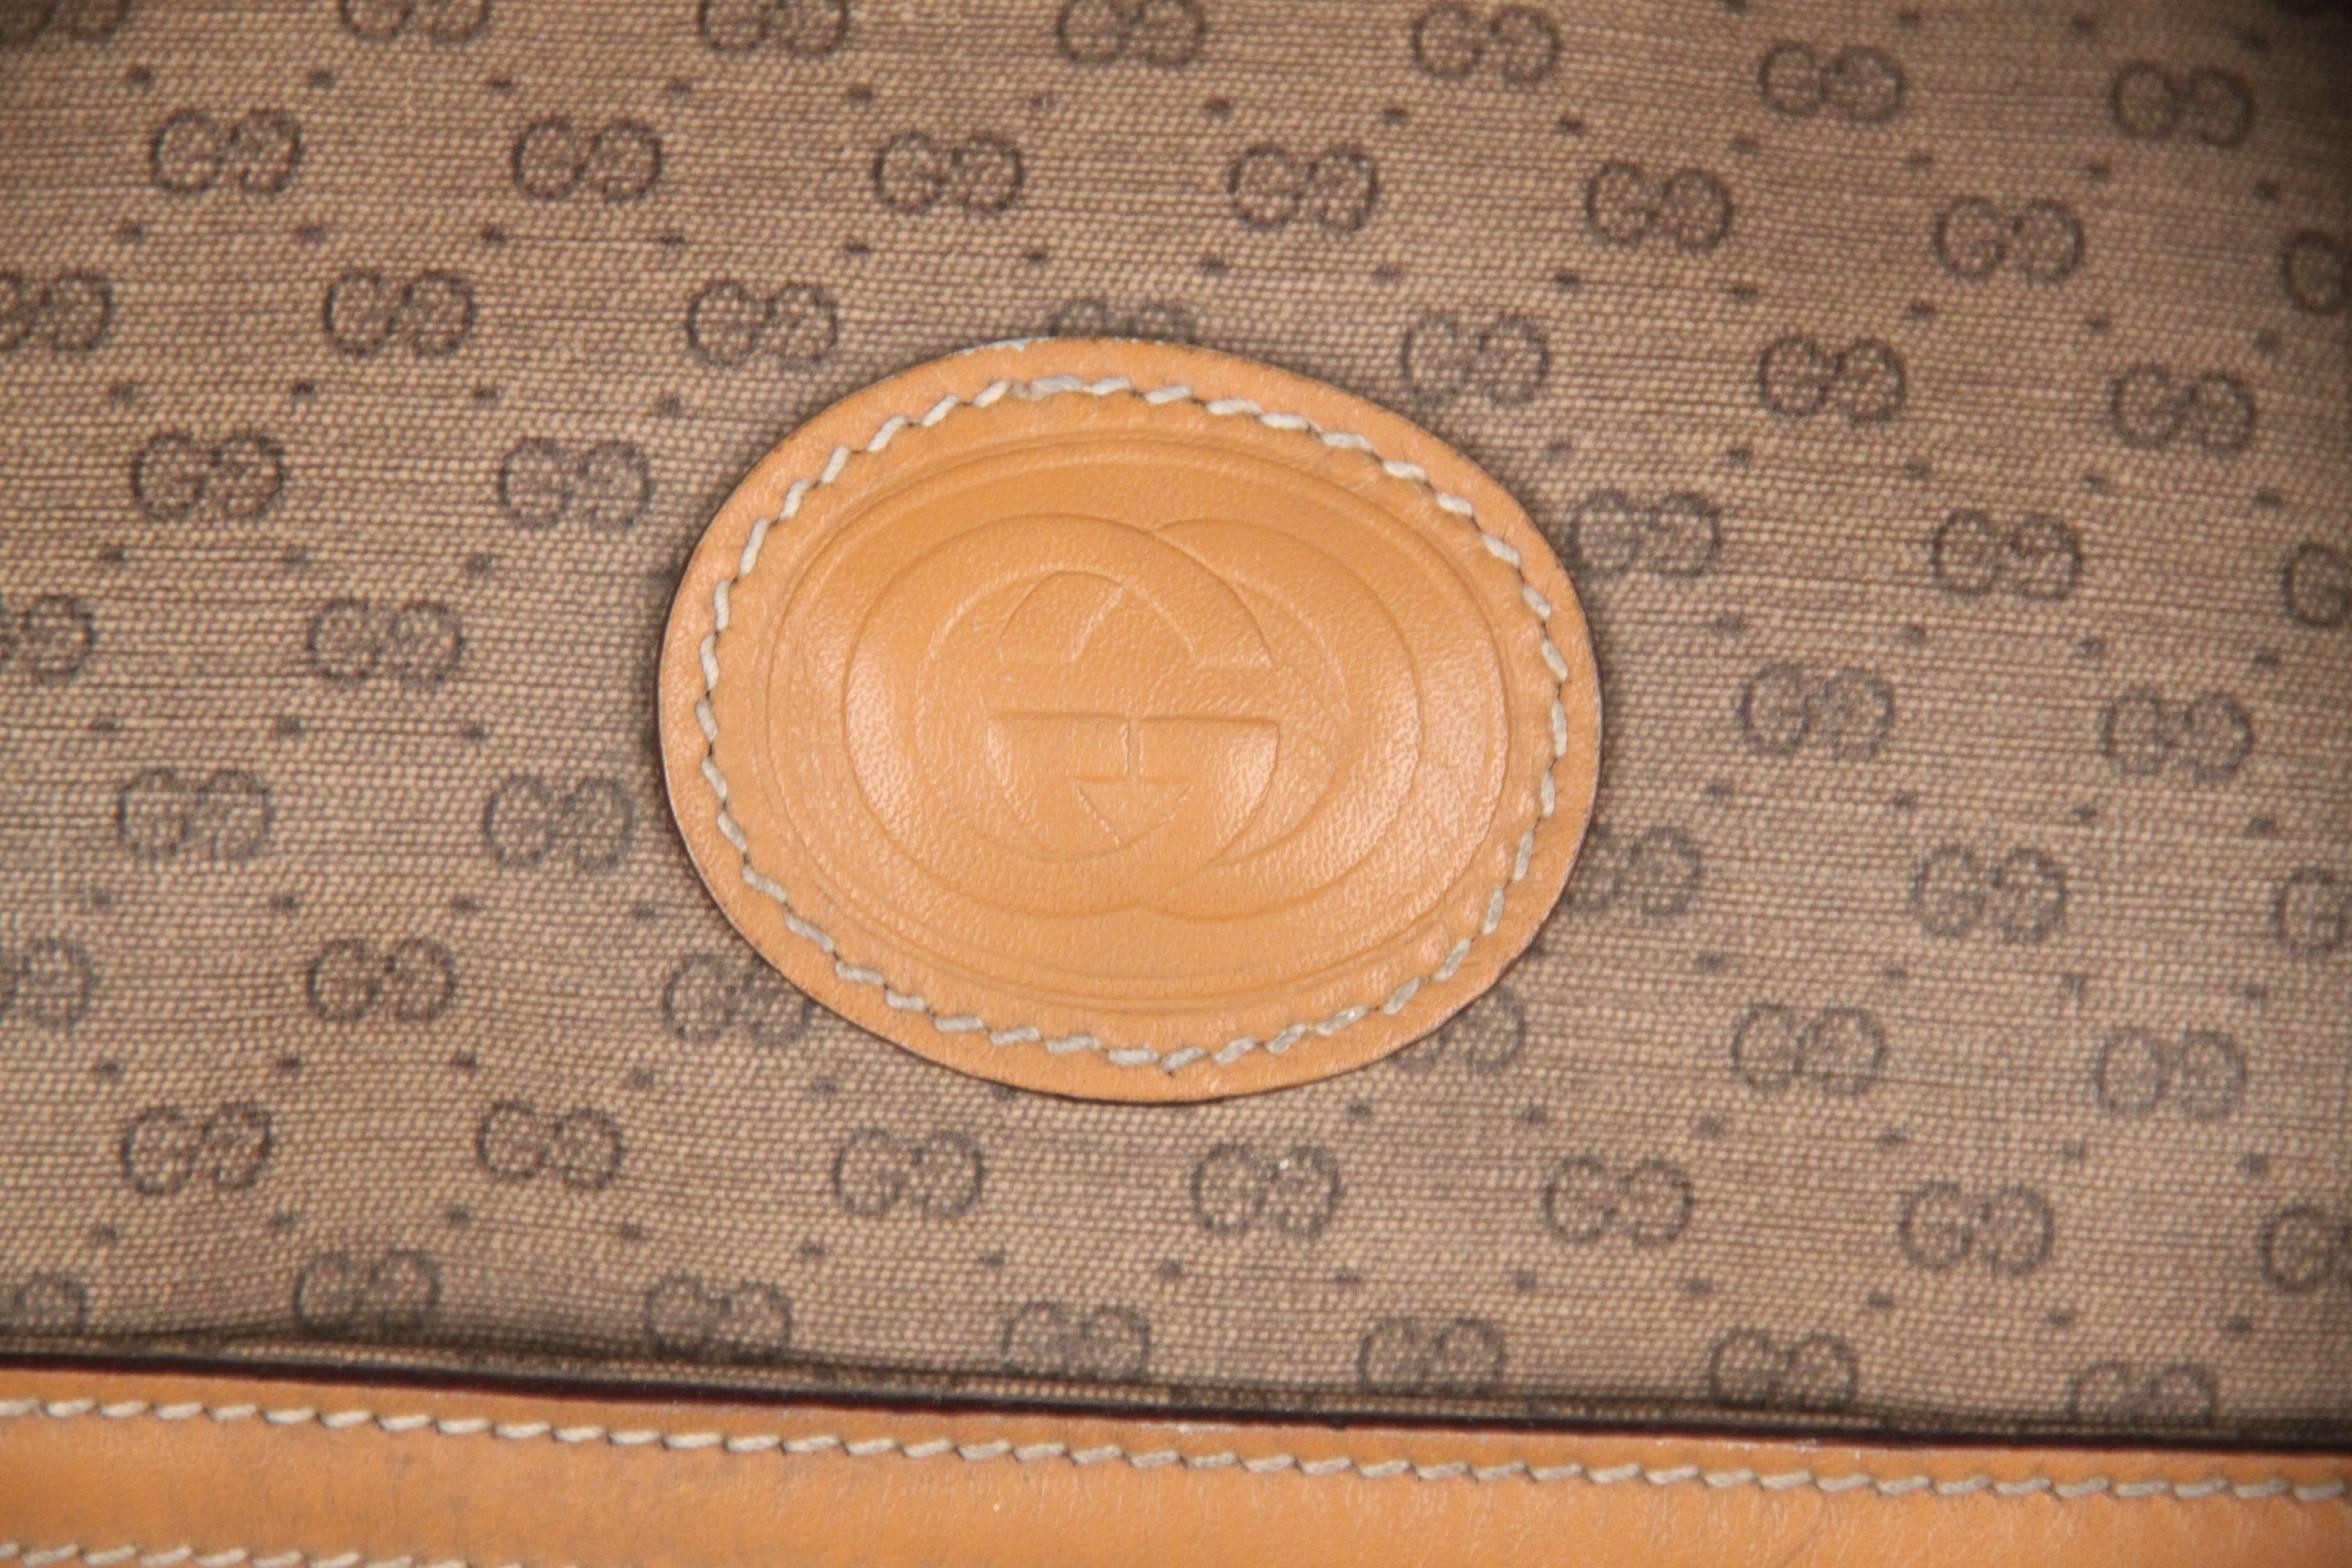 - Vintage GUCCI Weekender / Travel Bag

- Tan GG - GUCCI Monogram Canvas with Genuine Leather trim

- Upper zipper closure

- 1 open pocket and 1 zip pocket on the front

- Measurements: 12 x 18 1/2 x 9 inches - 30,5 x 47 x 22,8 cm


Logos / Tags: